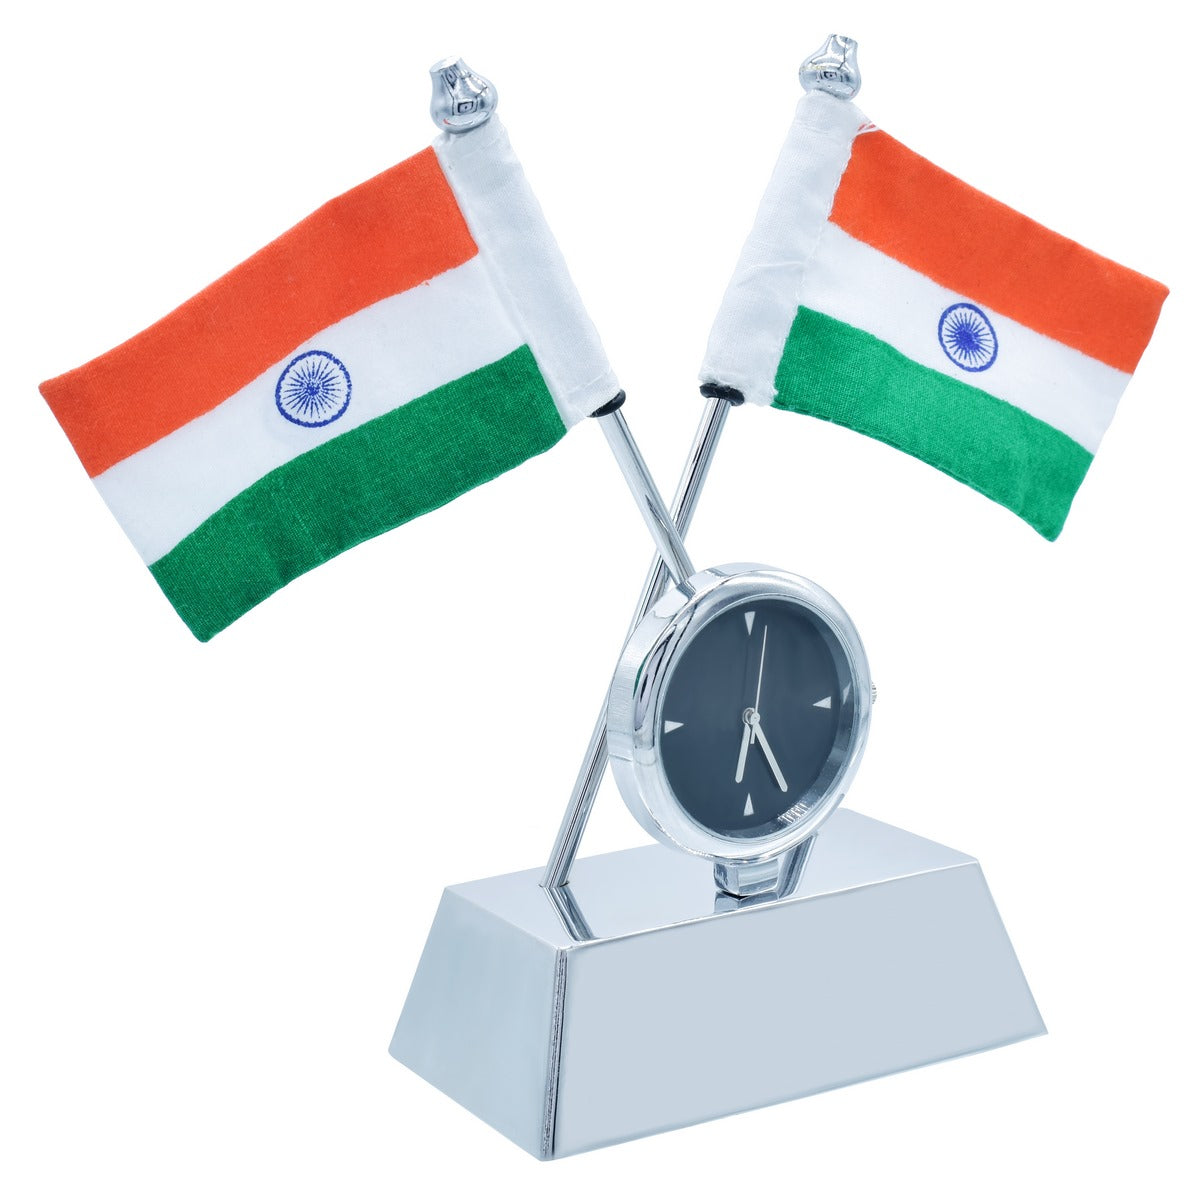 jags-mumbai Corporate Gift set Table Top Cross Flag Silver With Watch TT651SR